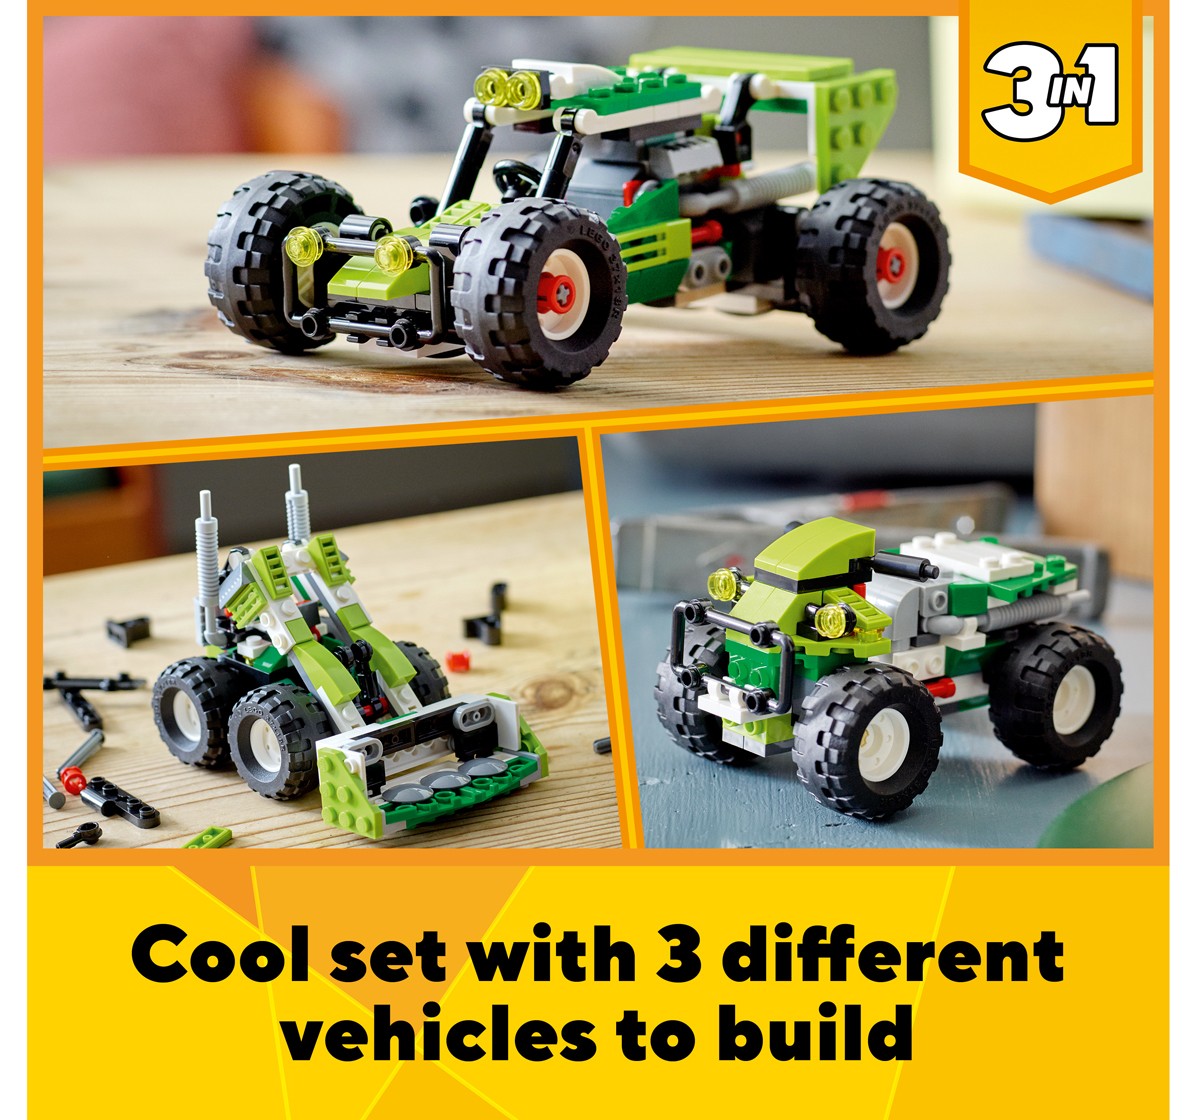 Creator 3in1 Off-Road Buggy Building Kit by Lego   a Buggy Toy, a Skid Loader or ATV (All-Terrain Vehicle) for Kids Aged 7 Years + (160 Pieces)